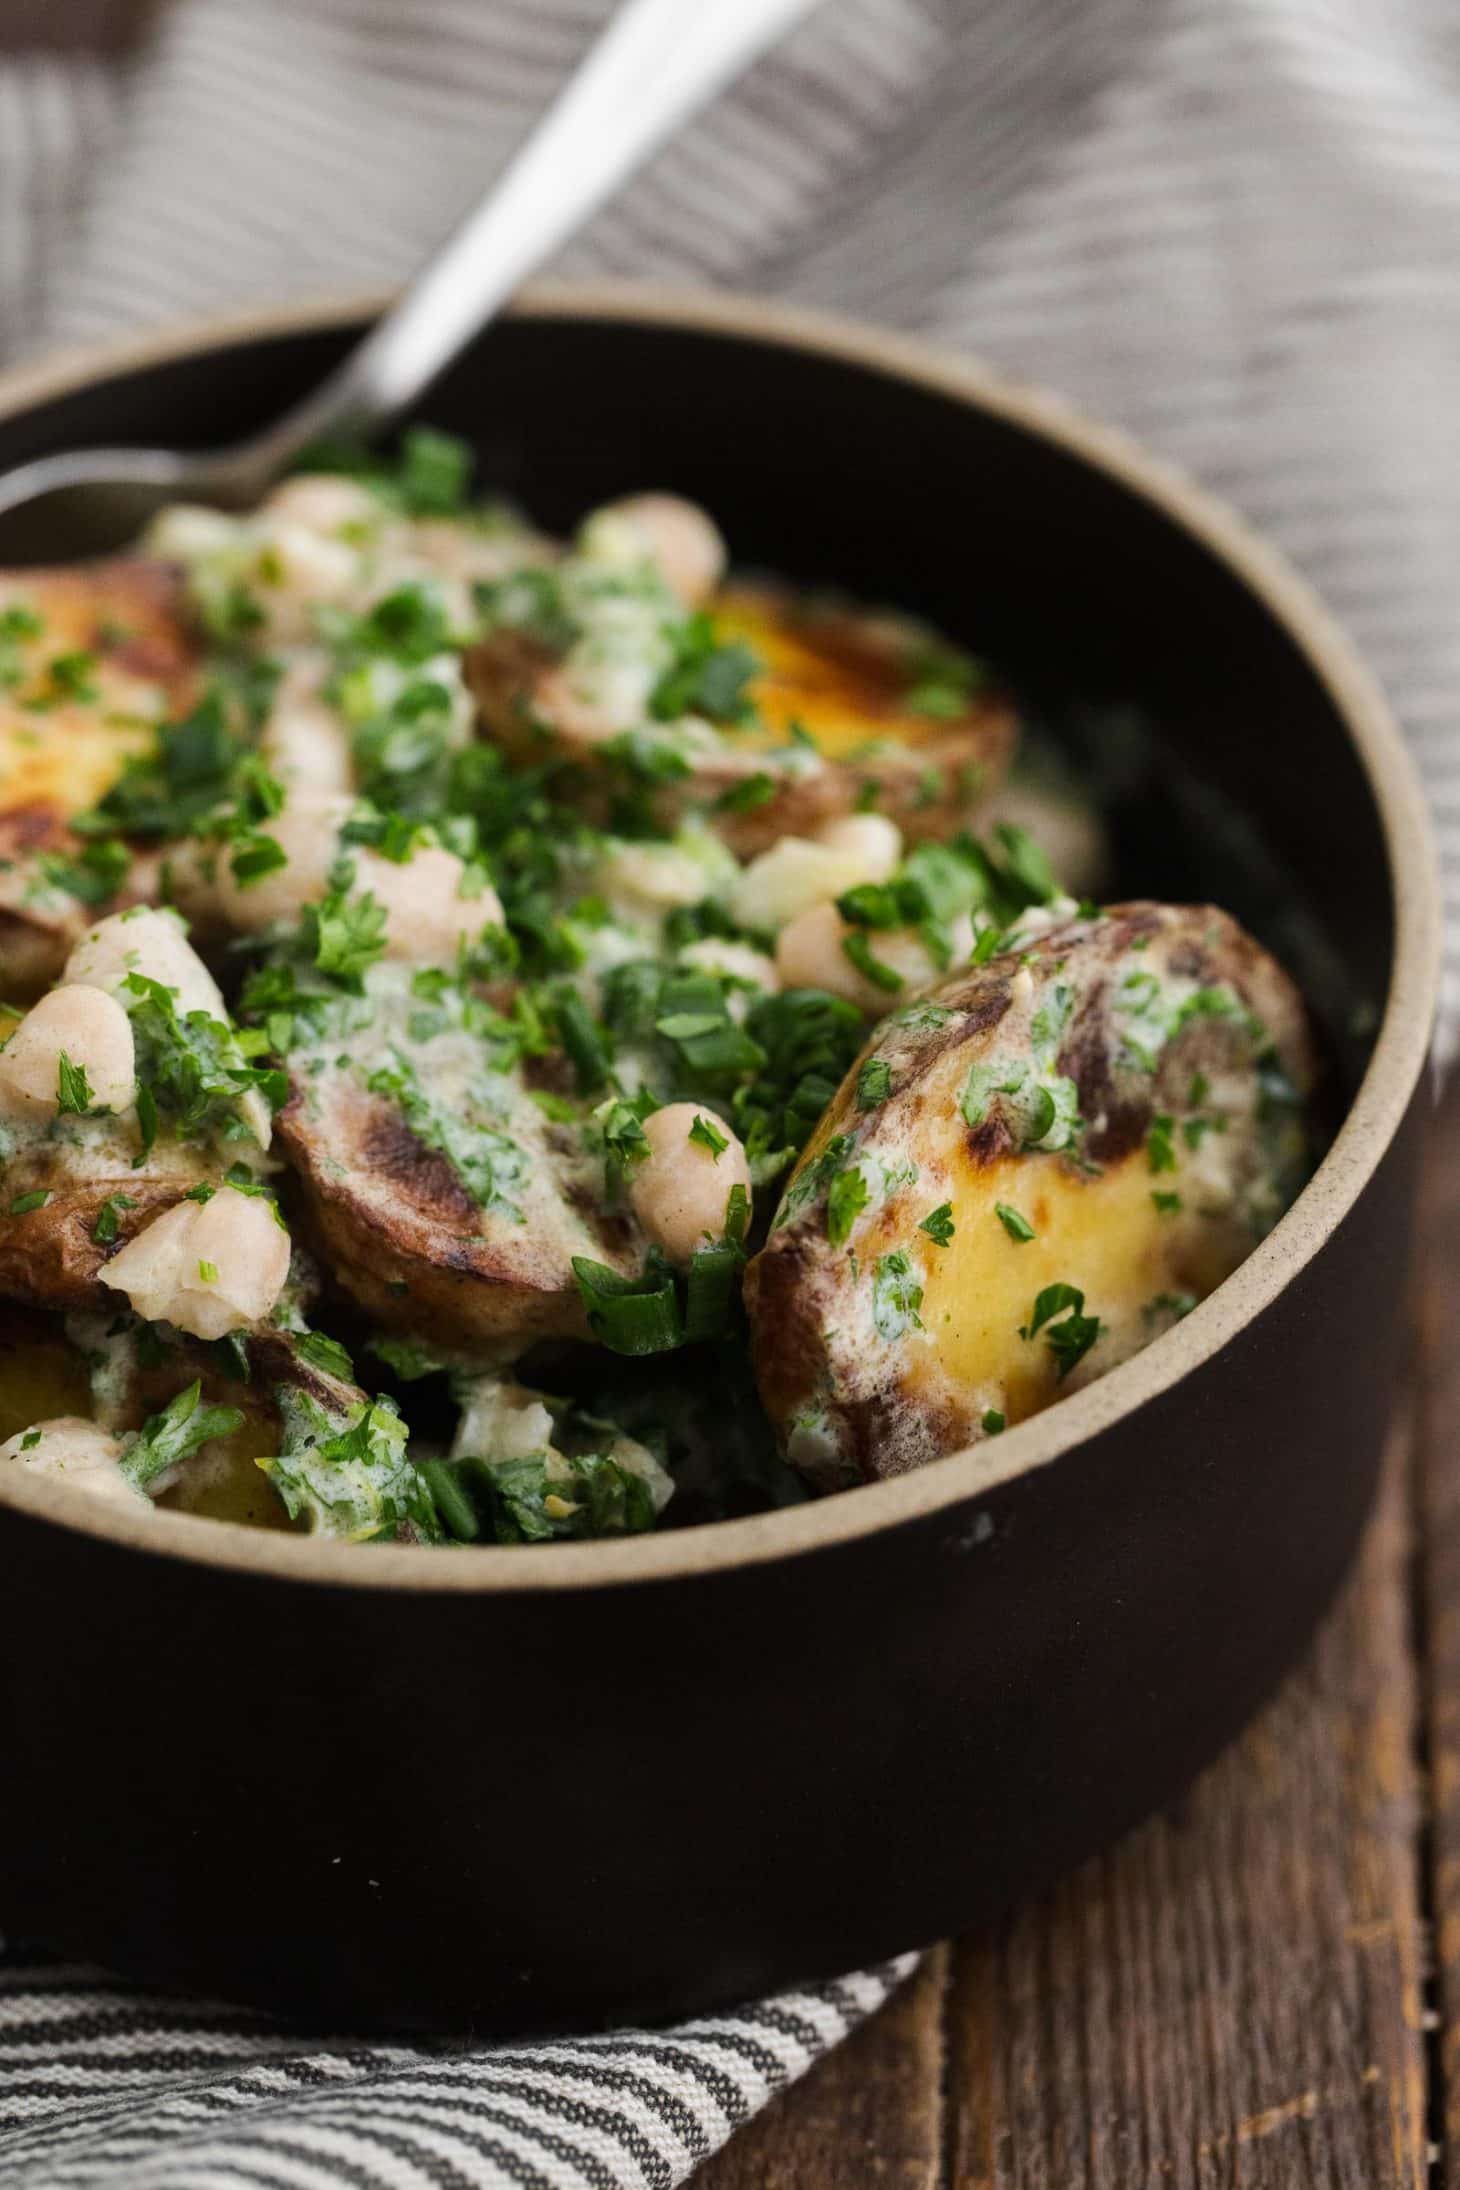 Braised Potato Salad with White Beans and Herbs